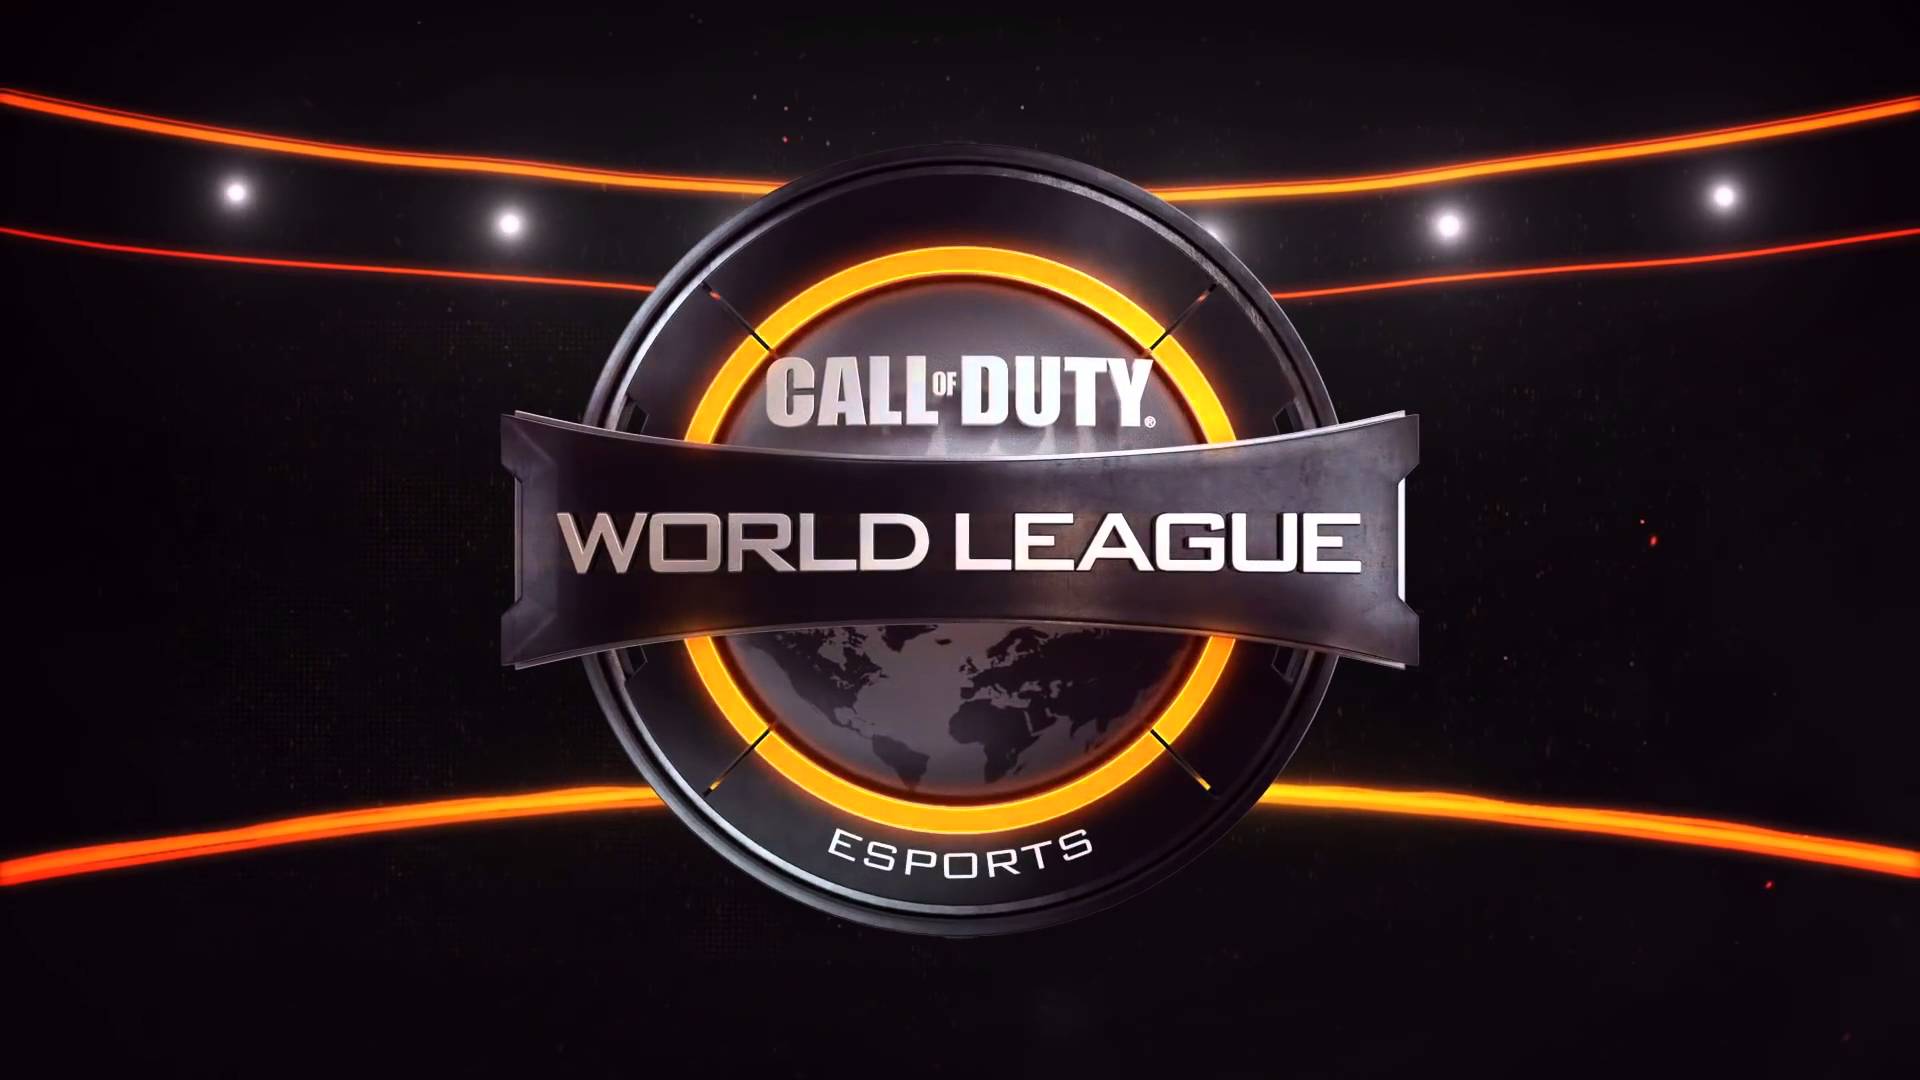 Call-of-Duty-World-League, Activision, Blizzard GamersRD